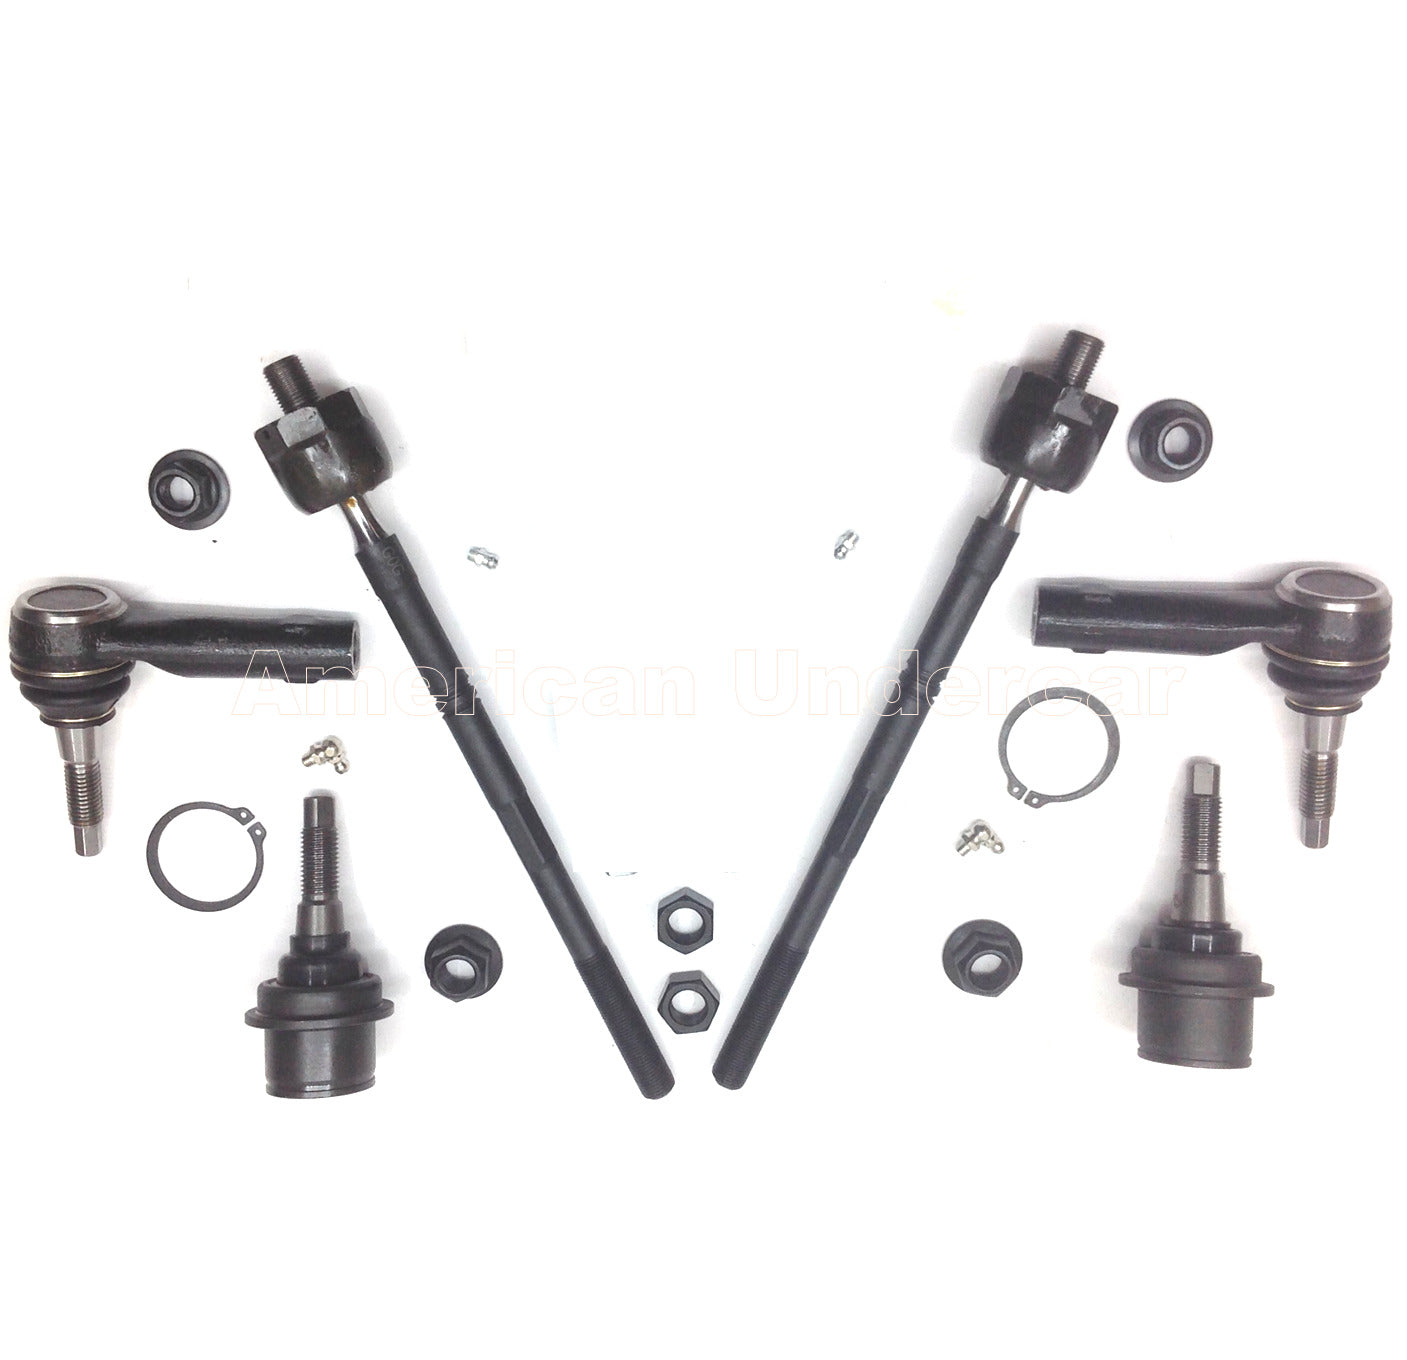 HD Ball Joints Tie Rod Steering Suspension Kit for 2010-2013 Ford Transit Connect 2WD